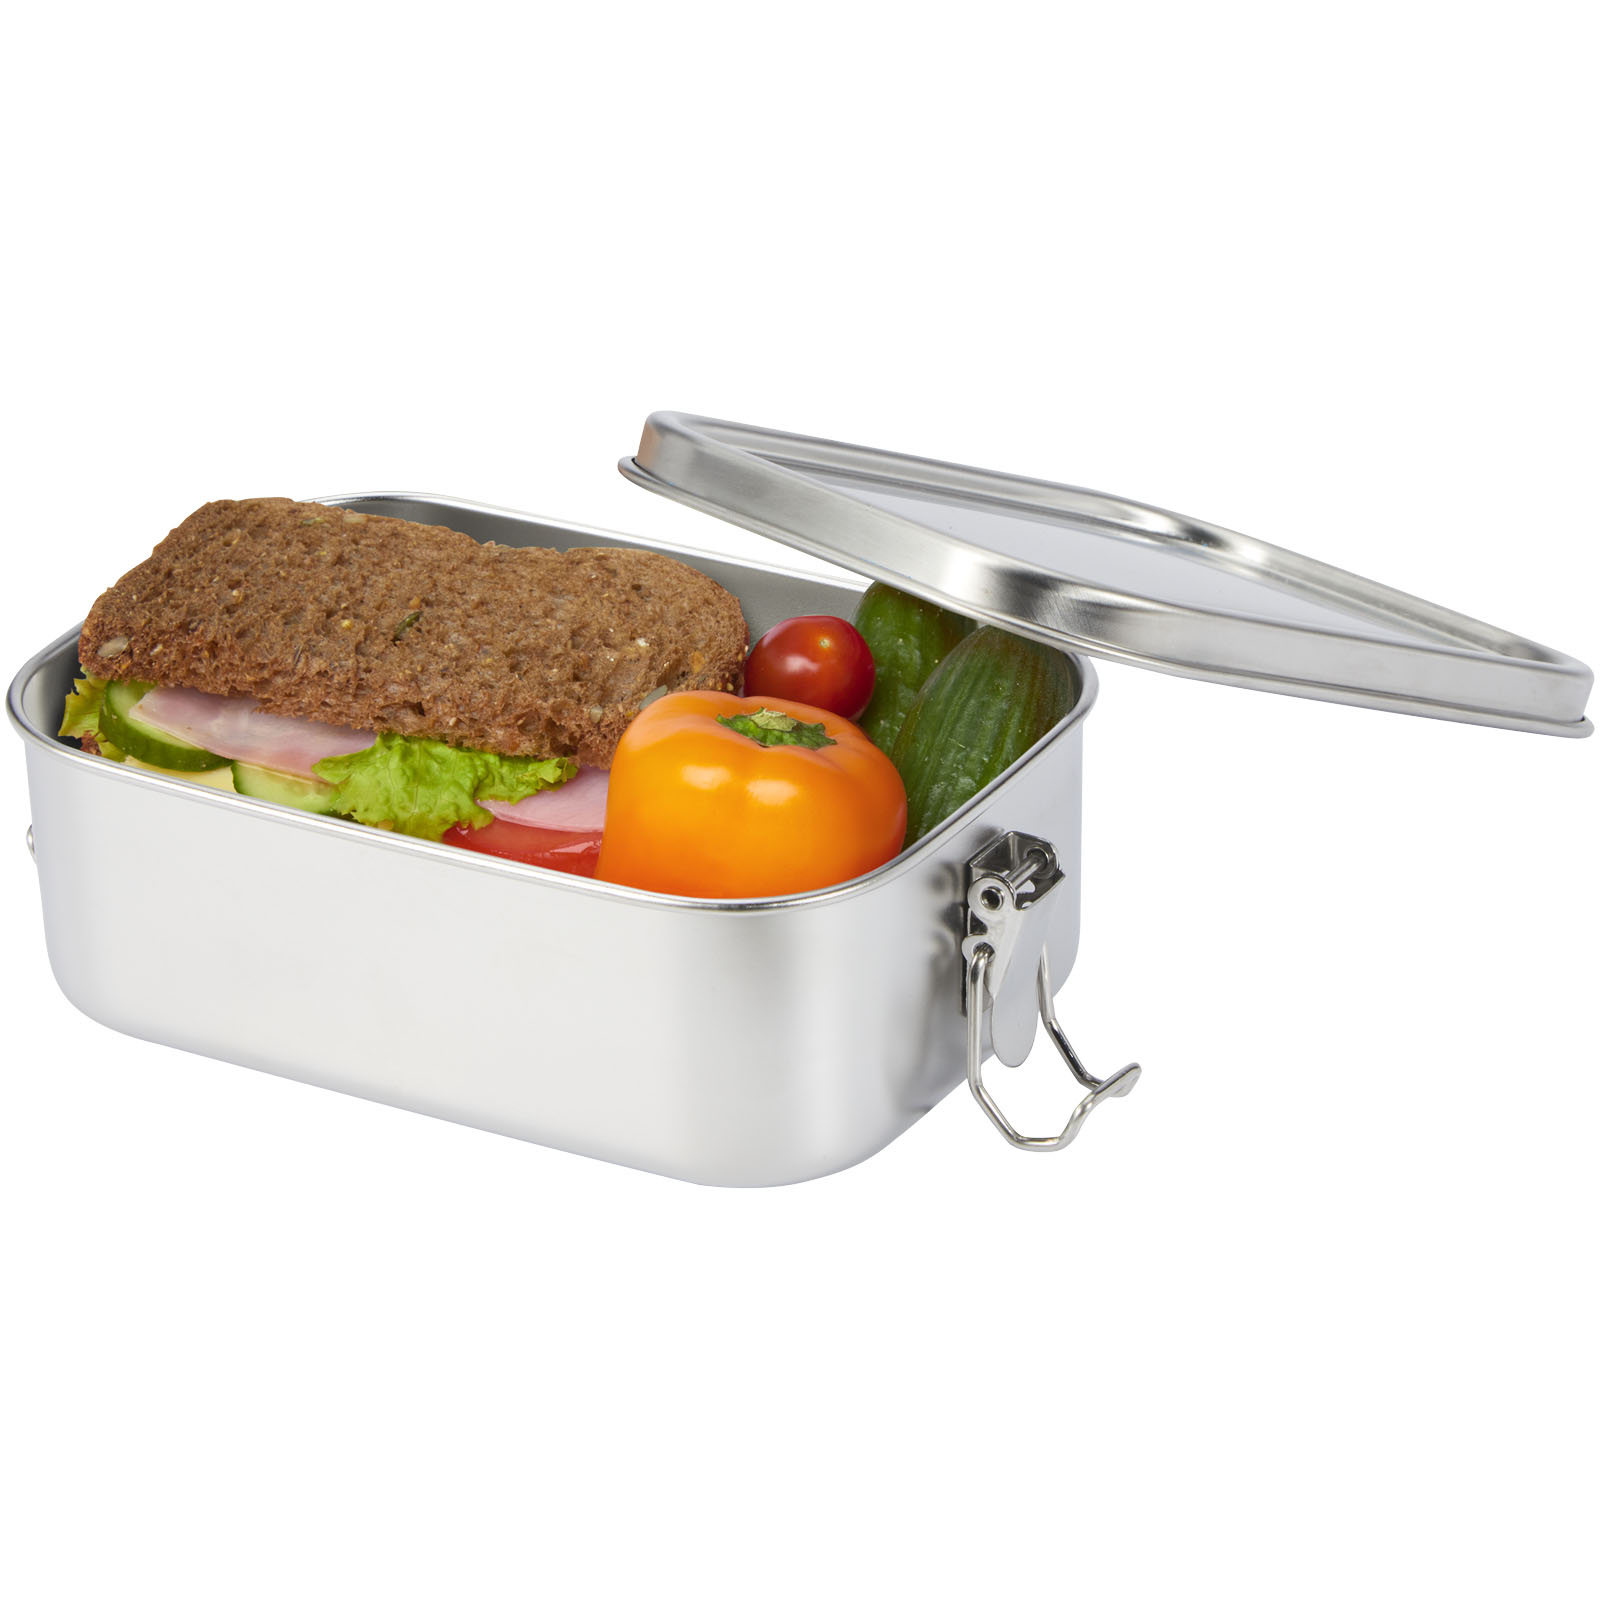 Advertising Lunch Boxes - Titan recycled stainless steel lunch box - 4